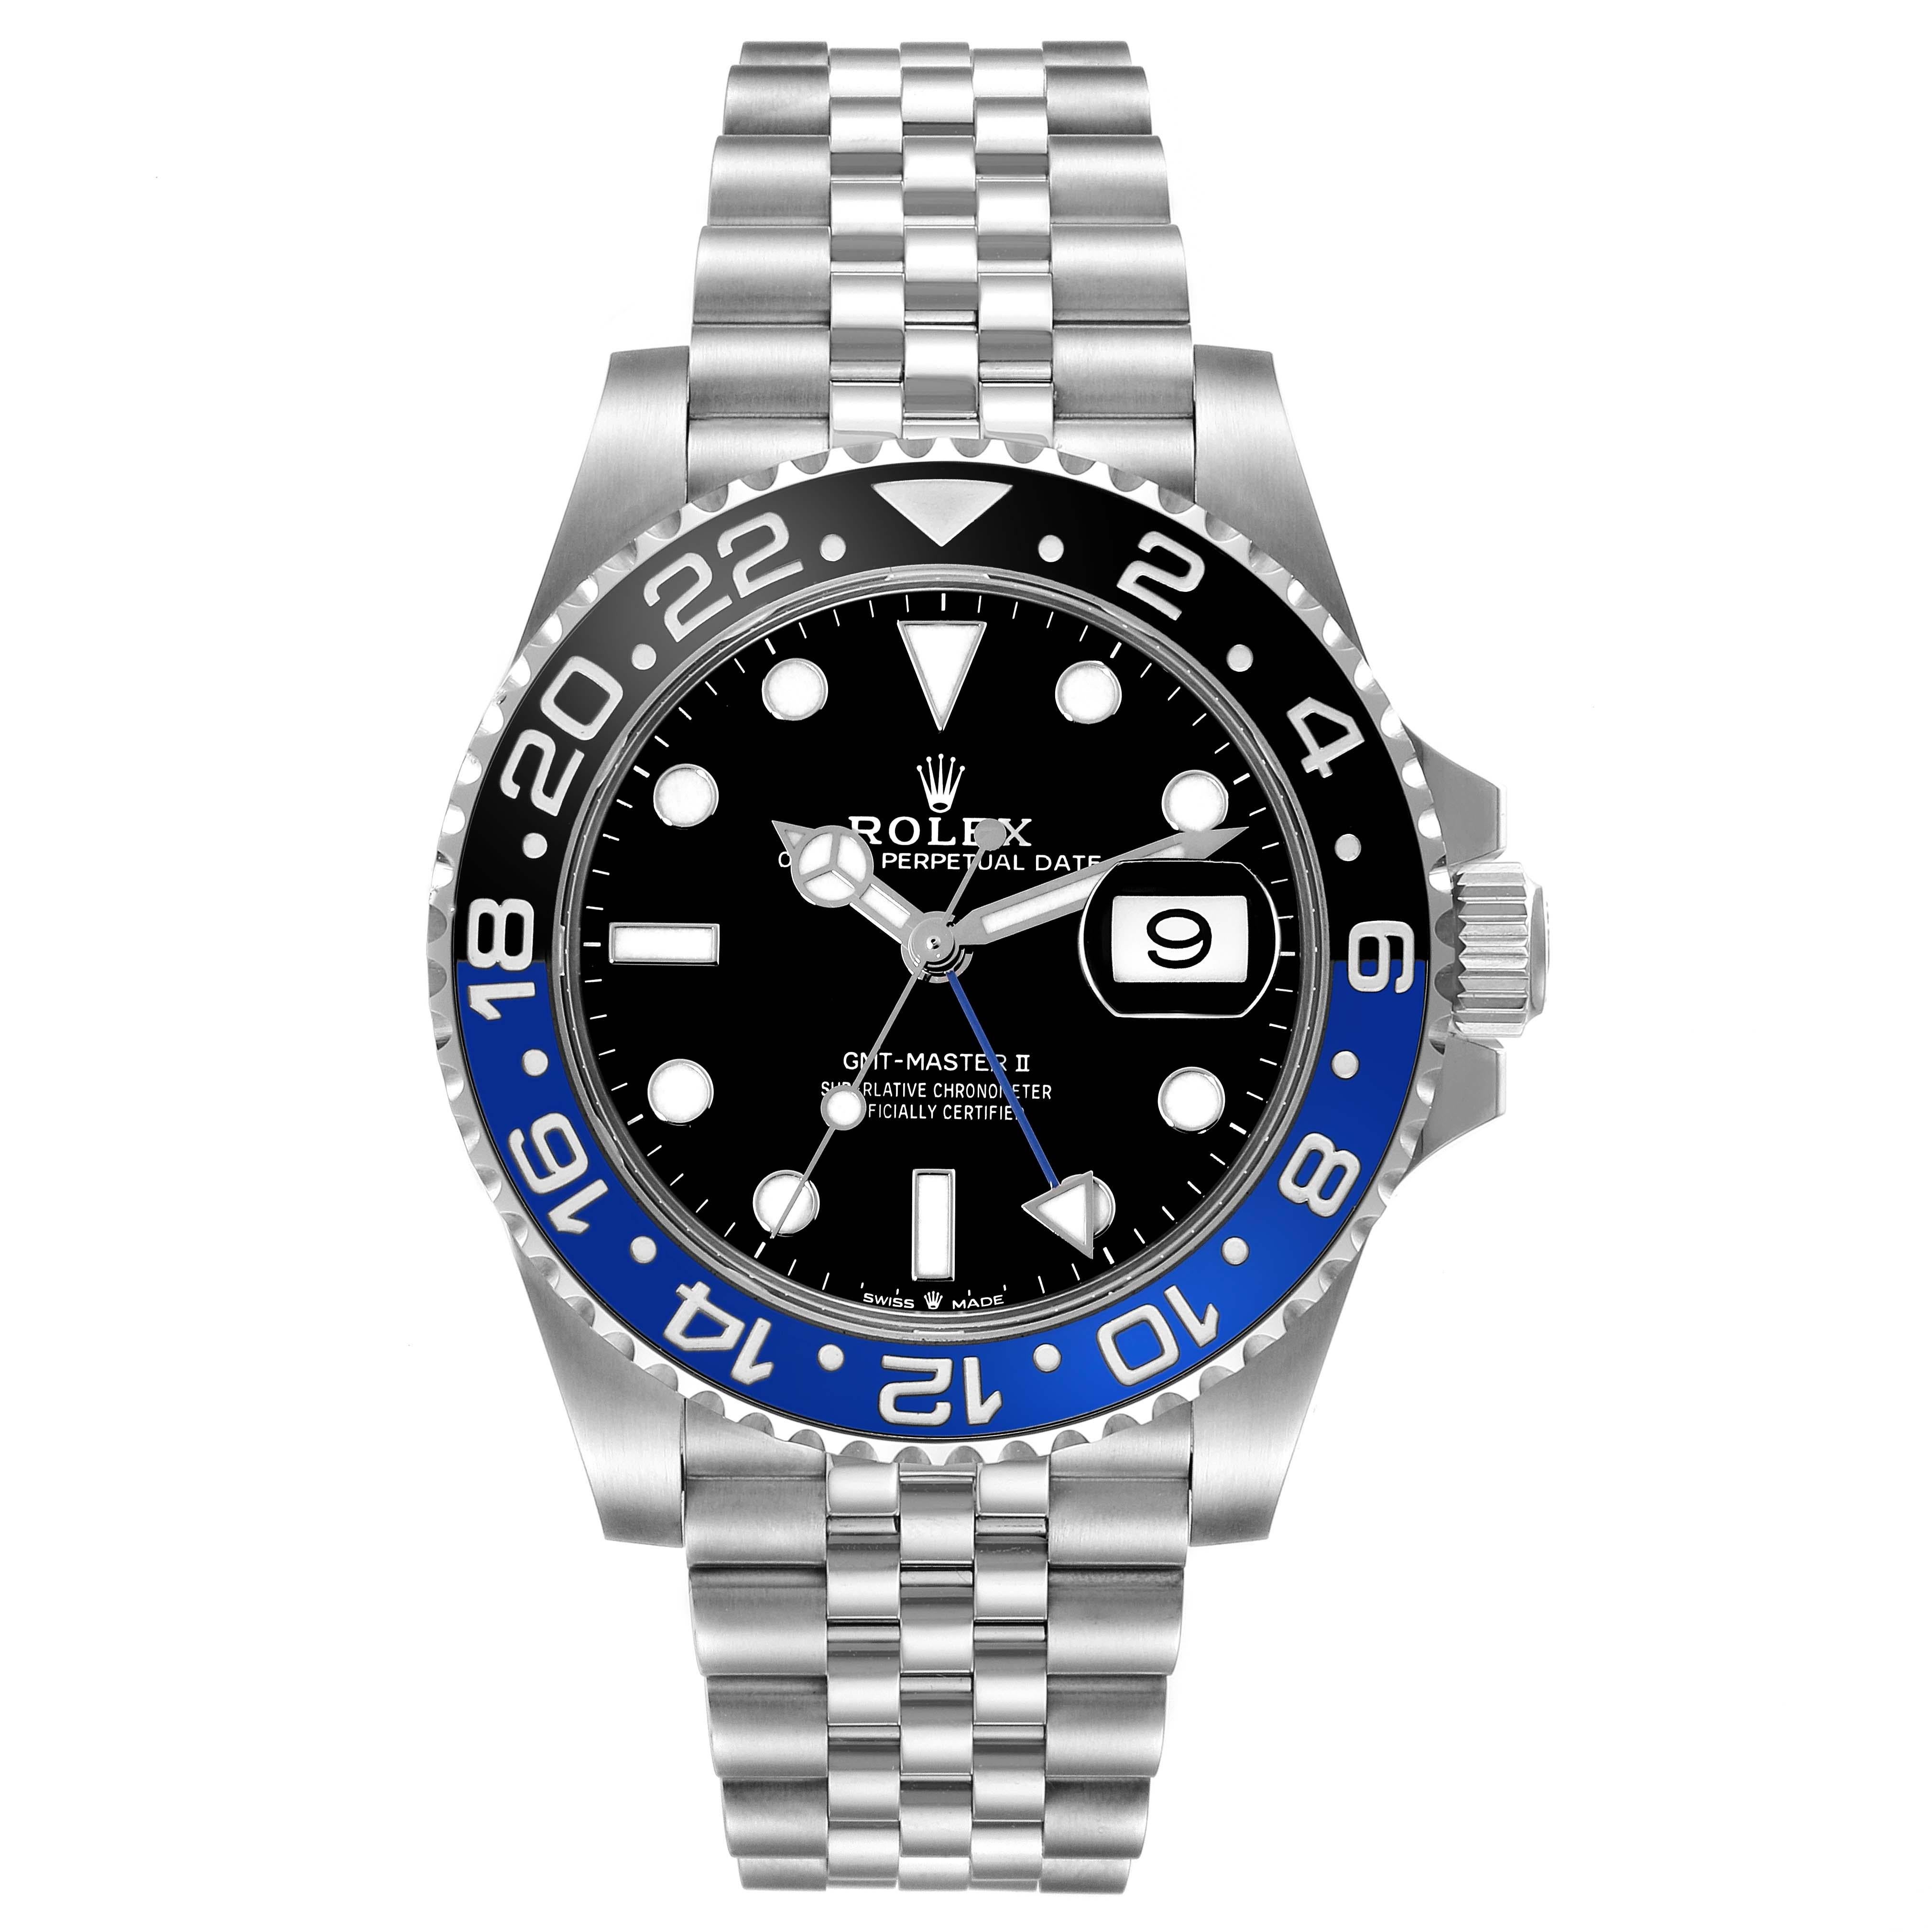 Rolex GMT Master II Batgirl Black Blue Bezel Steel Mens Watch 126710 Box Card. Officially certified chronometer automatic self-winding movement. Stainless steel case 40 mm in diameter. Rolex logo on the crown. Stainless steel bidirectional rotating